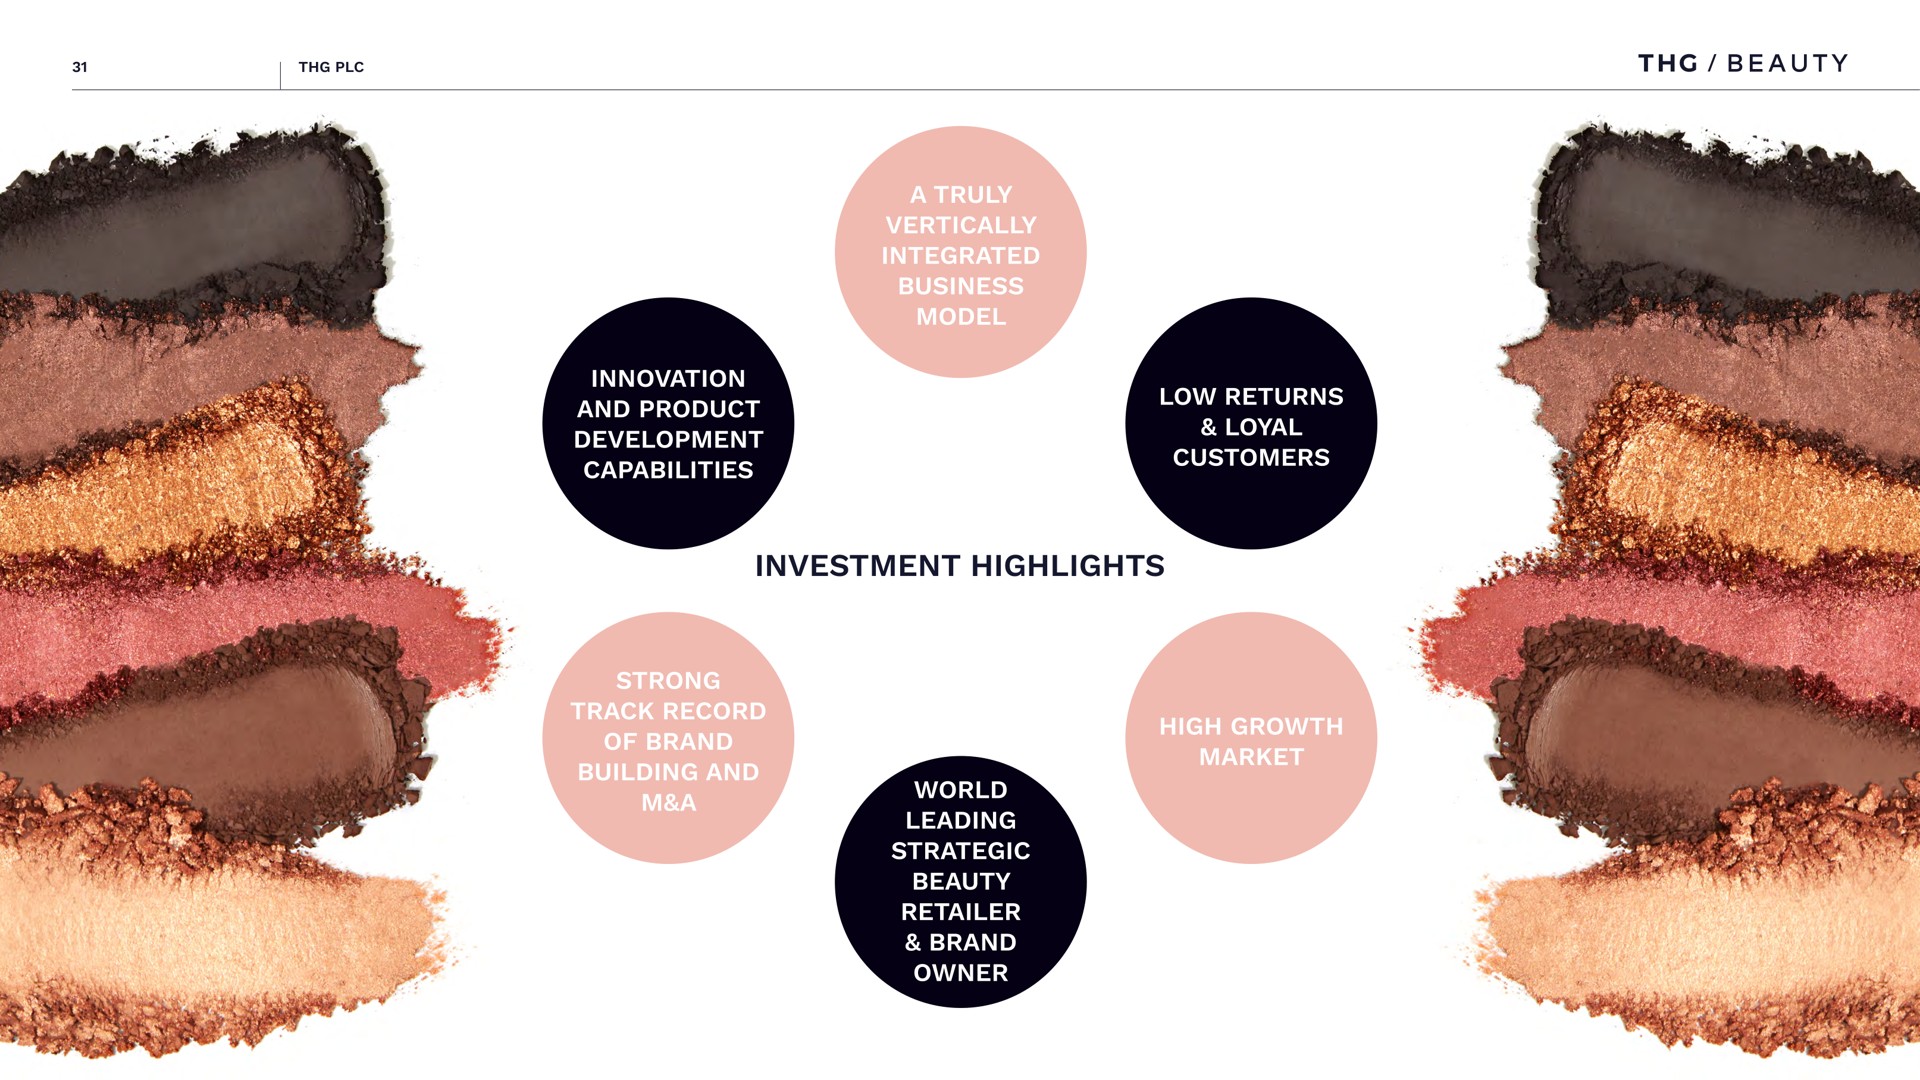 beauty innovation and product development capabilities on vas ate loyal customers investment highlights owner world leading strategic beauty retailer brand | The Hut Group